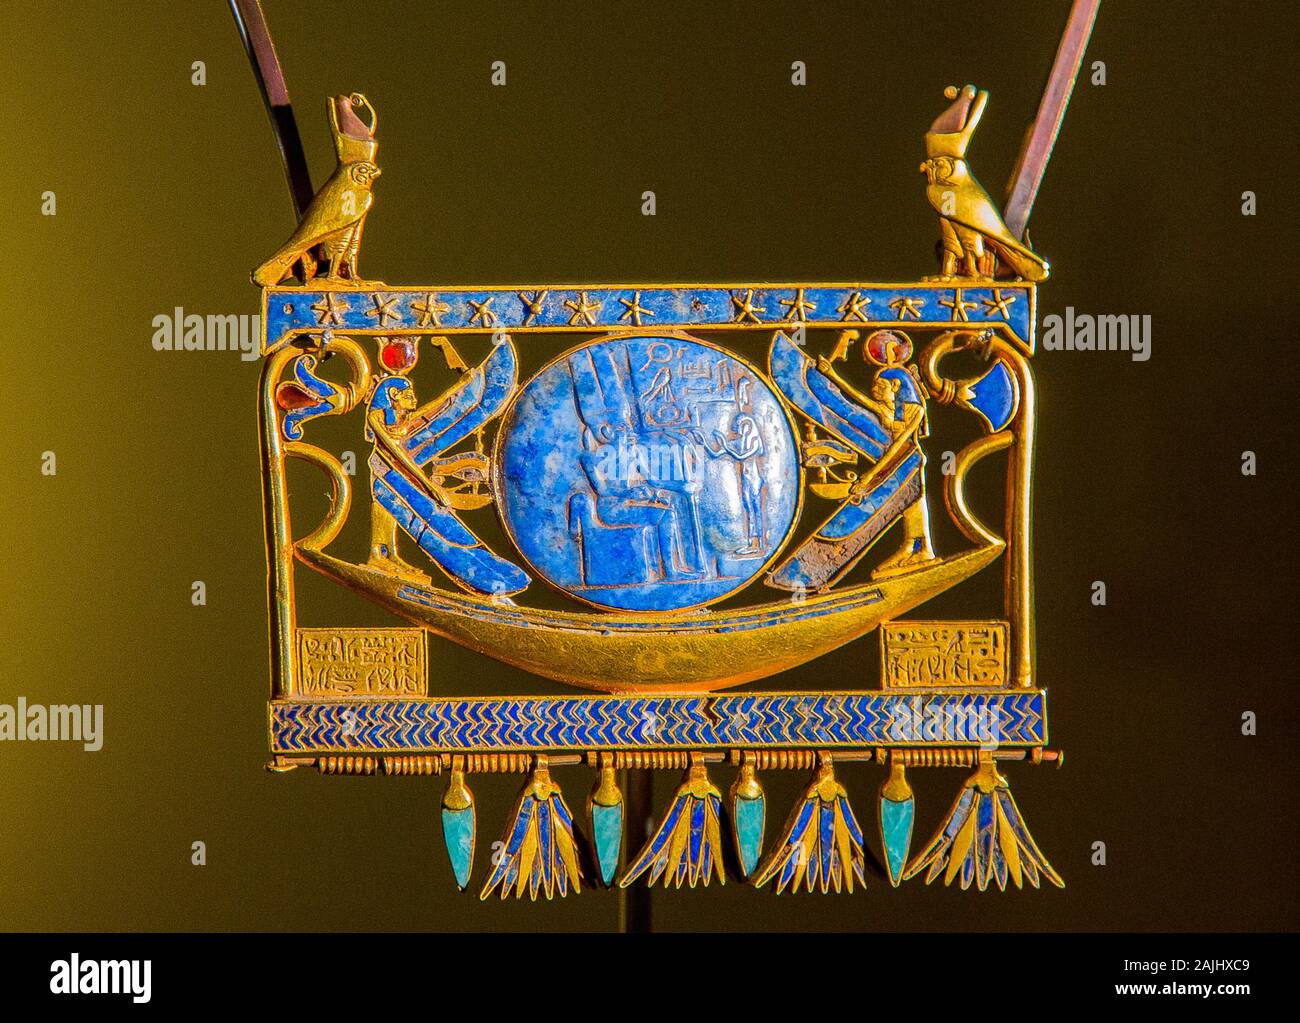 Photo taken during the opening visit of the exhibition “Osiris, Egypt's Sunken Mysteries”. Egypt, Cairo, Egyptian Museum, pectoral found in Tanis. Stock Photo